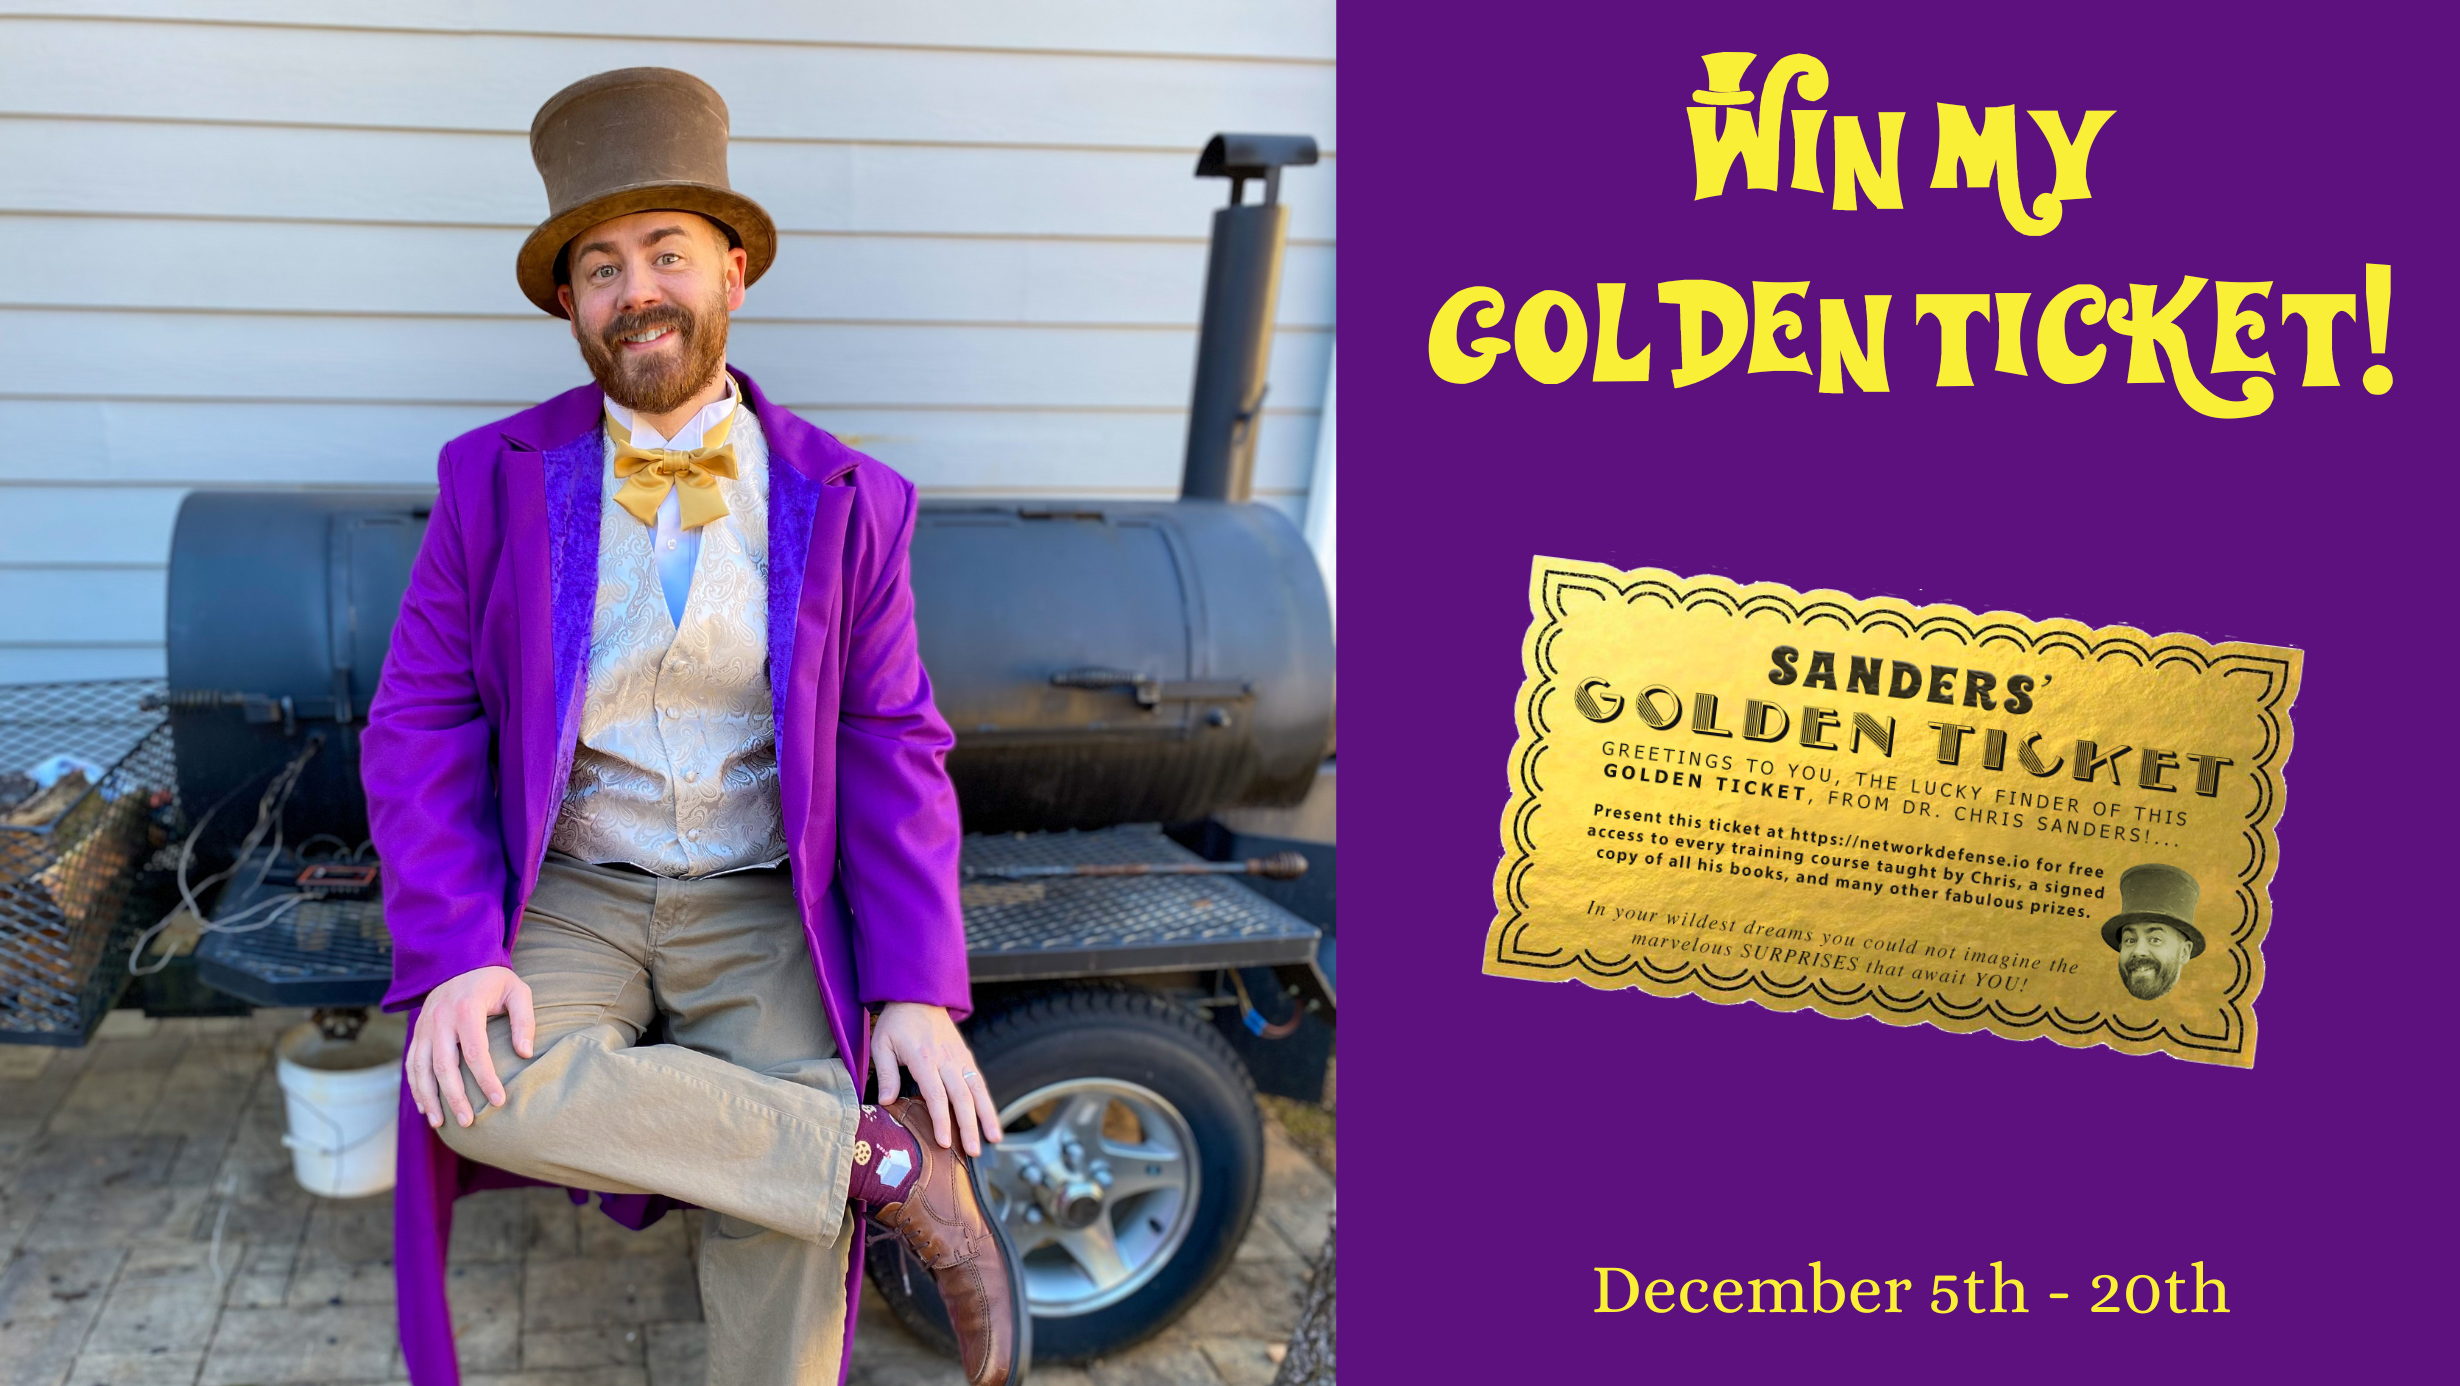 Chris Sanders appears in a Willy Wonka costume, next to the words "Win my Golden Ticket!" and an image of a Golden Ticket.